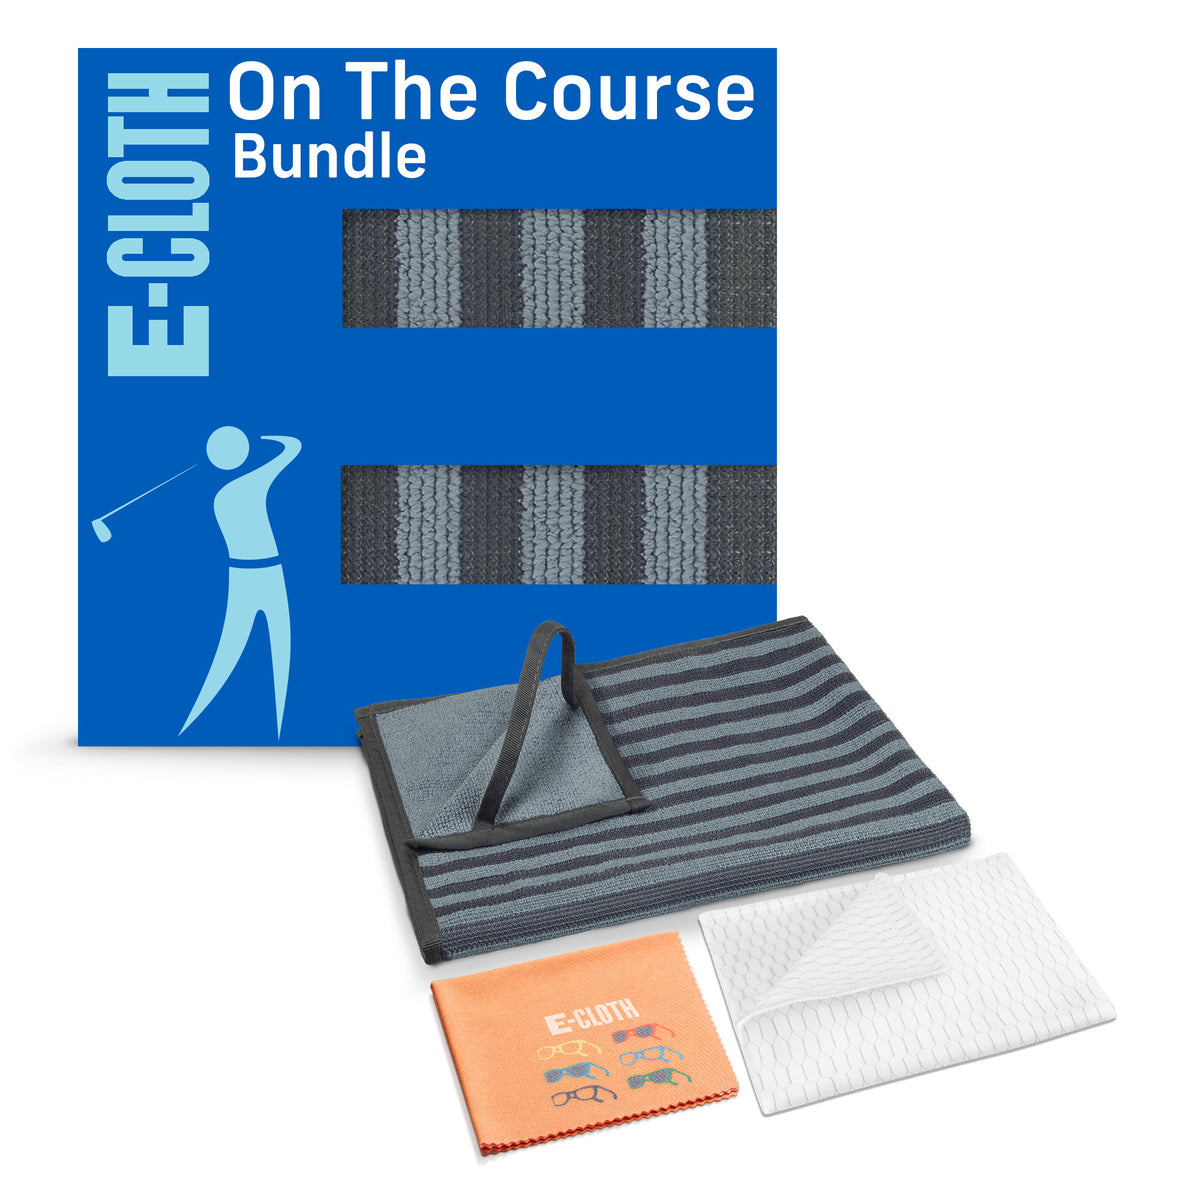 On the Course Bundle